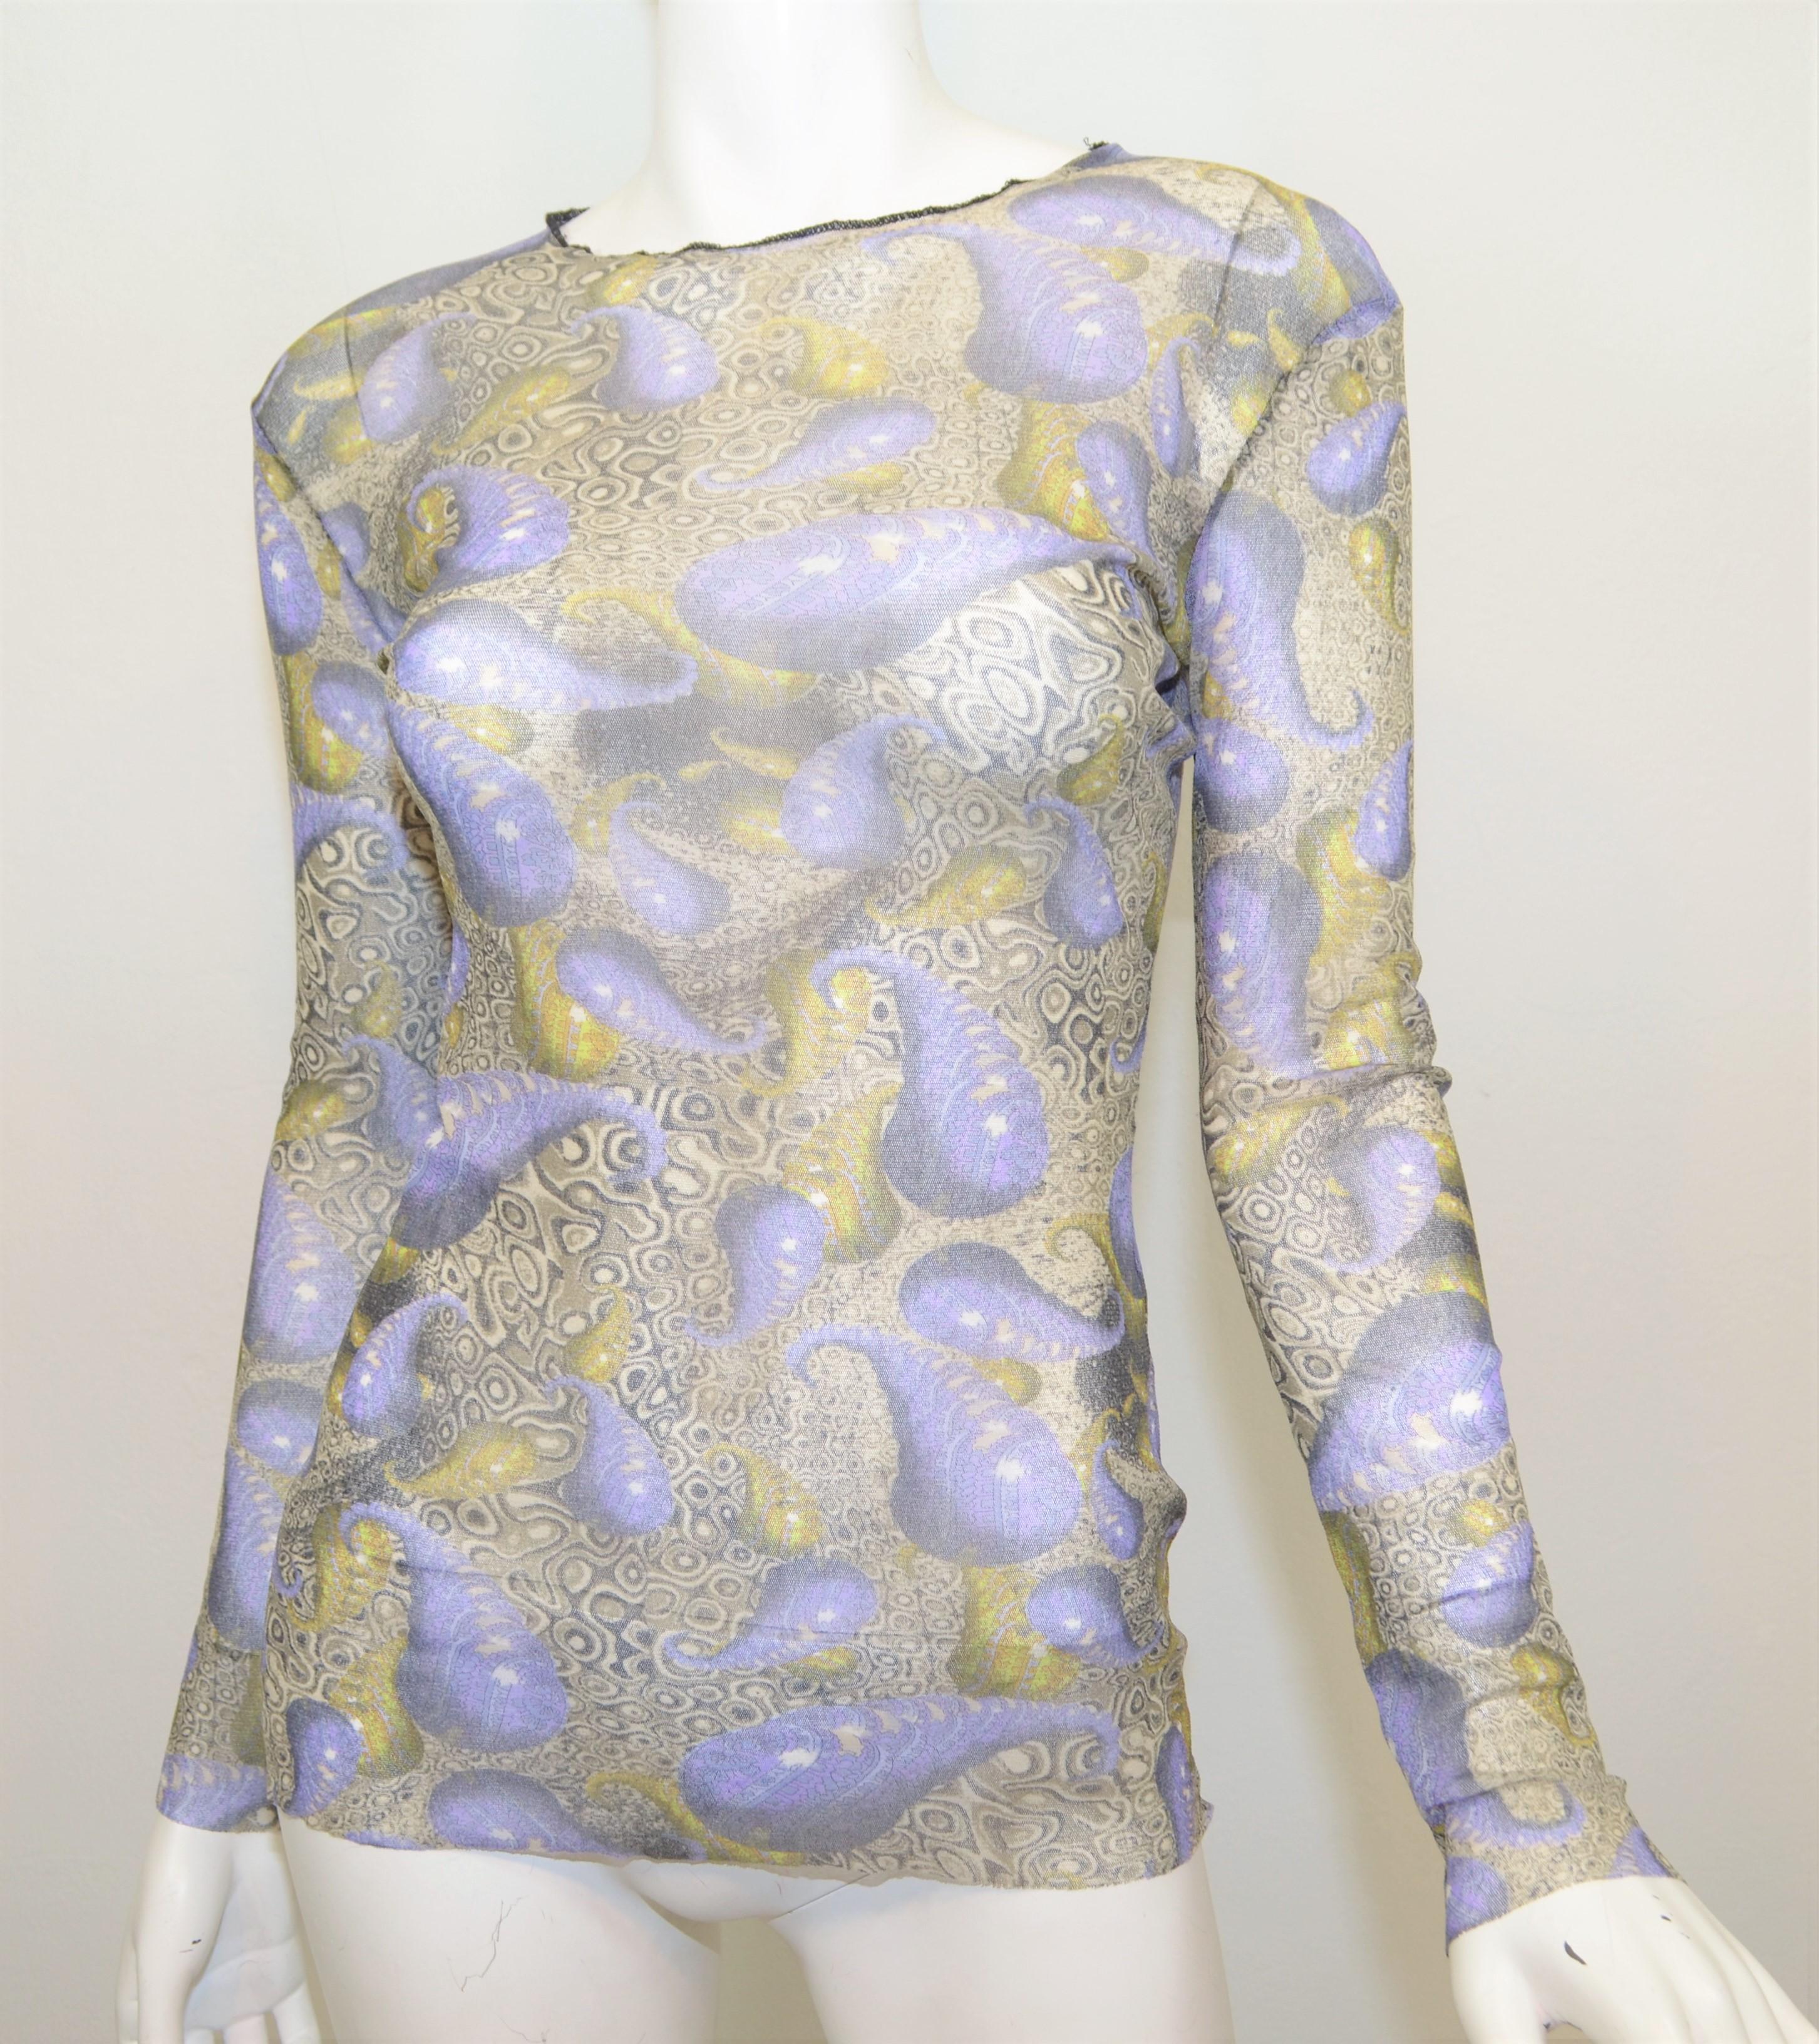 Jean Paul Gaultier top is featured in a variation of grey, purple, and green colors throughout with a paisley print throughout the mesh knit fabric. Top is a size Small, made in Italy. Top is in excellent condition with no major flaws to